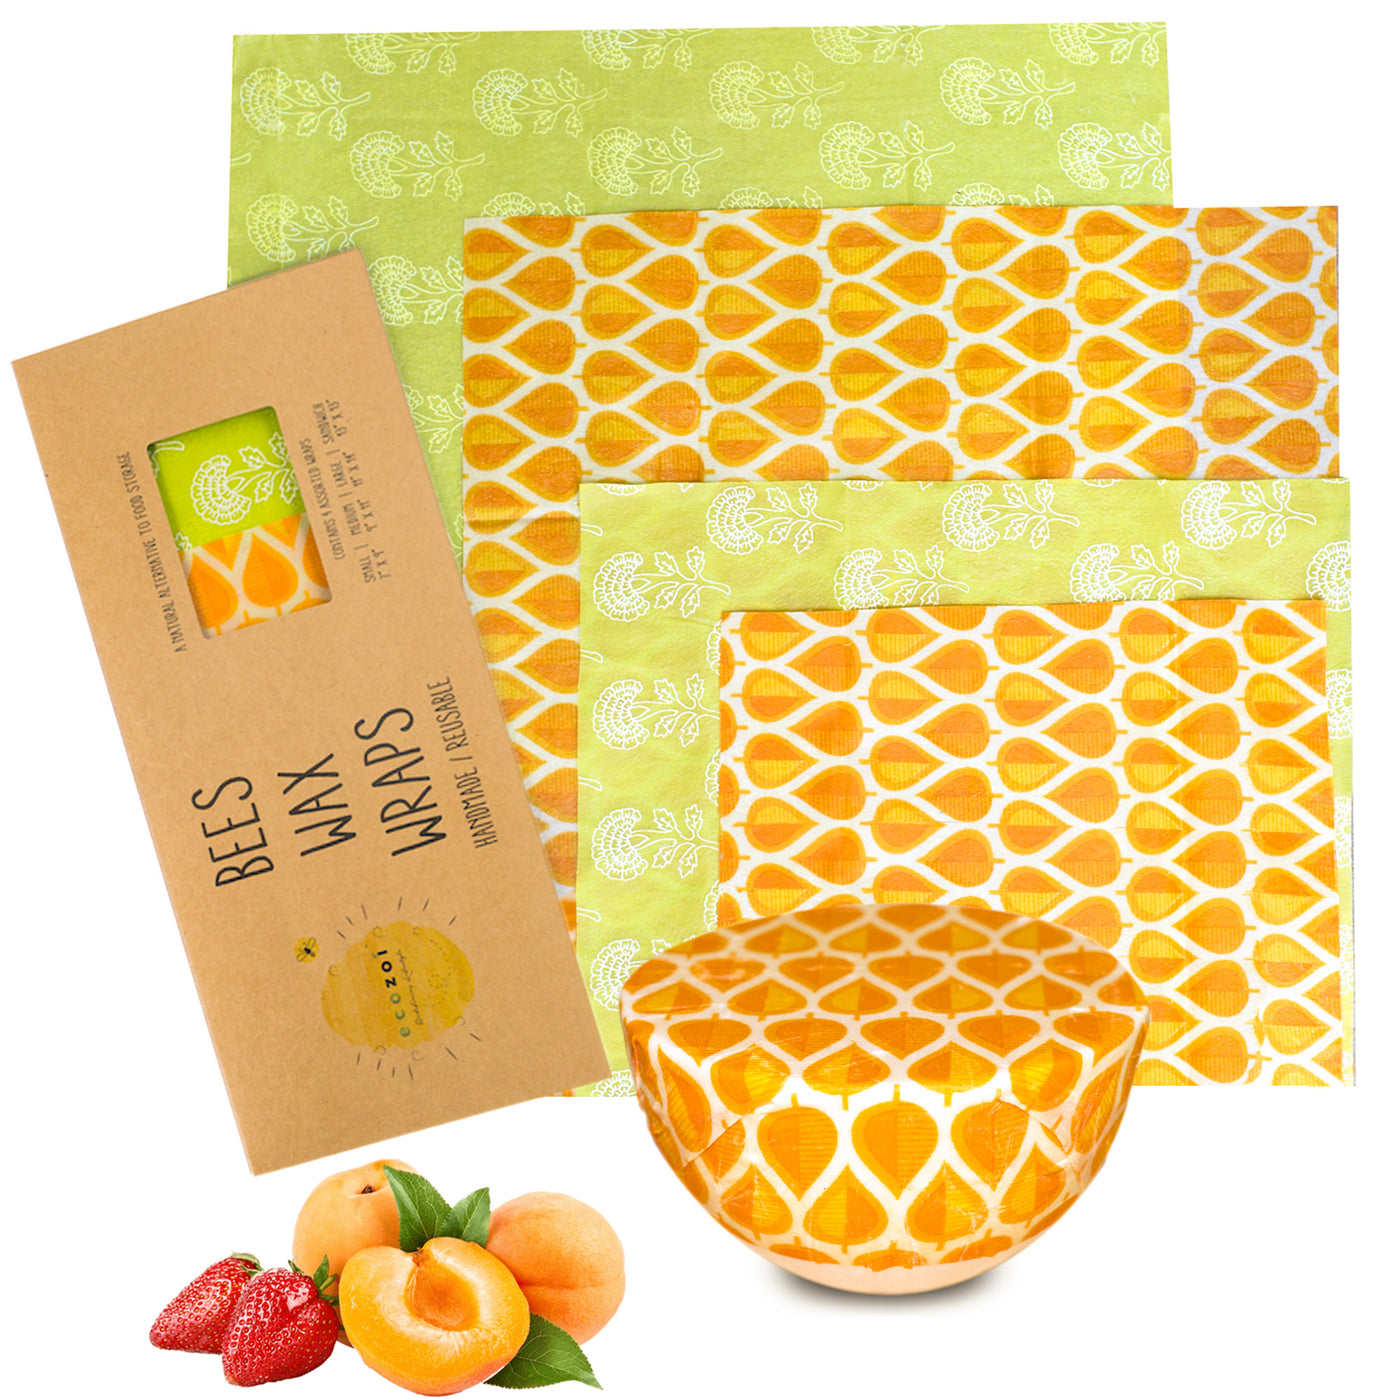 Ecozoi Reusable BeesWax Food Wraps, Assorted 4 Pack for Sandwiches, and Fruit & Veggie Bowls freeshipping - ecozoi